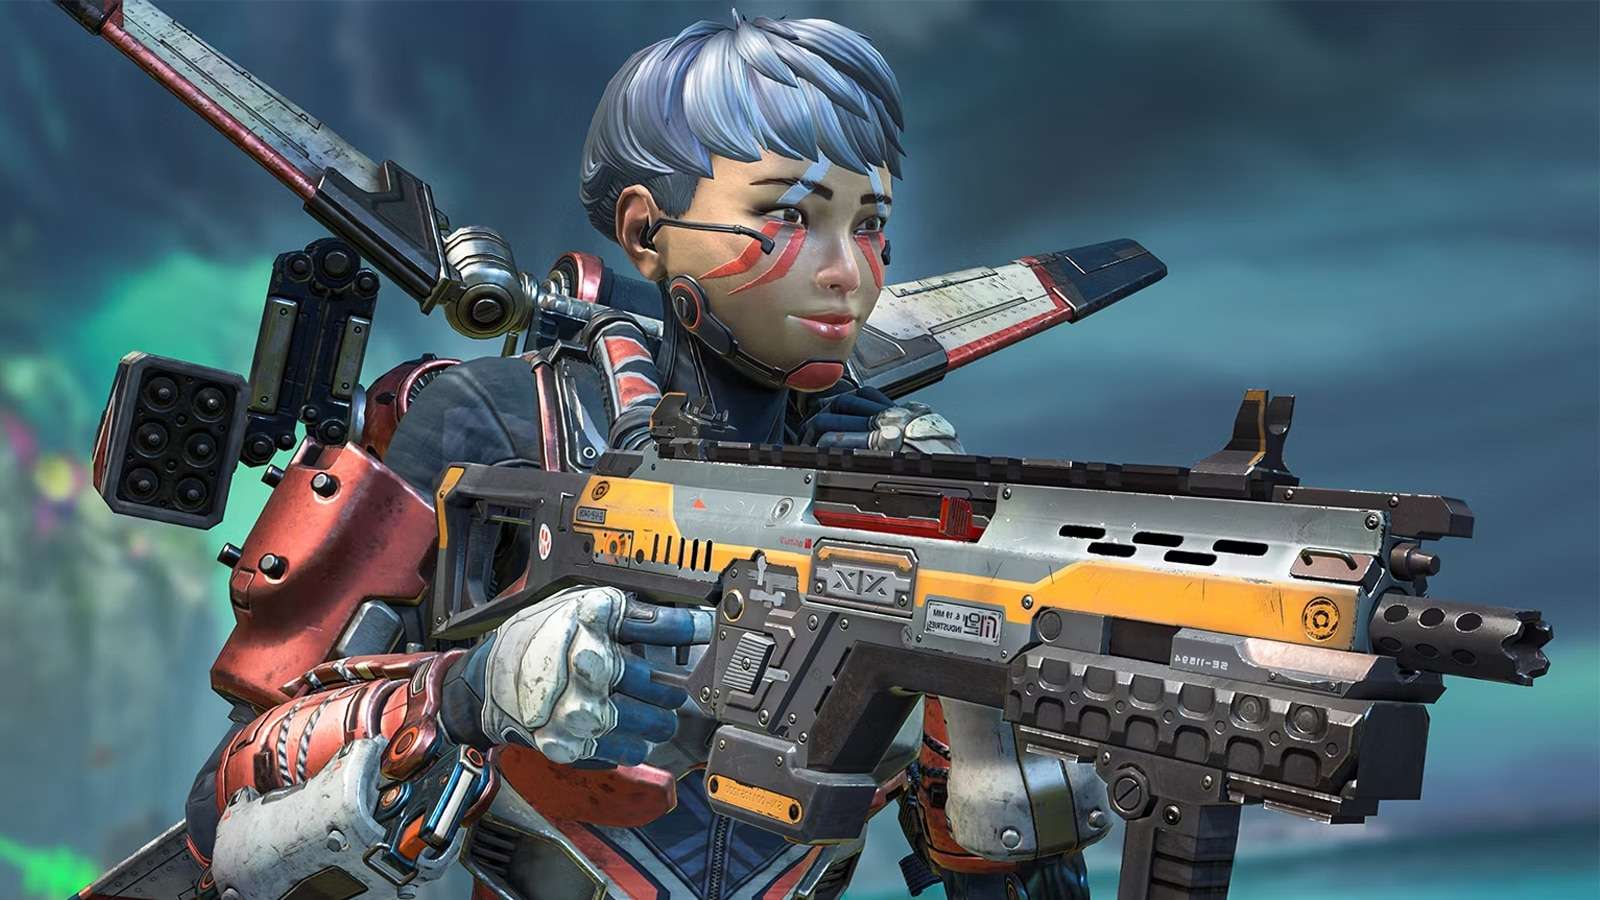 Valkyrie holding CAR SMG in apex legends